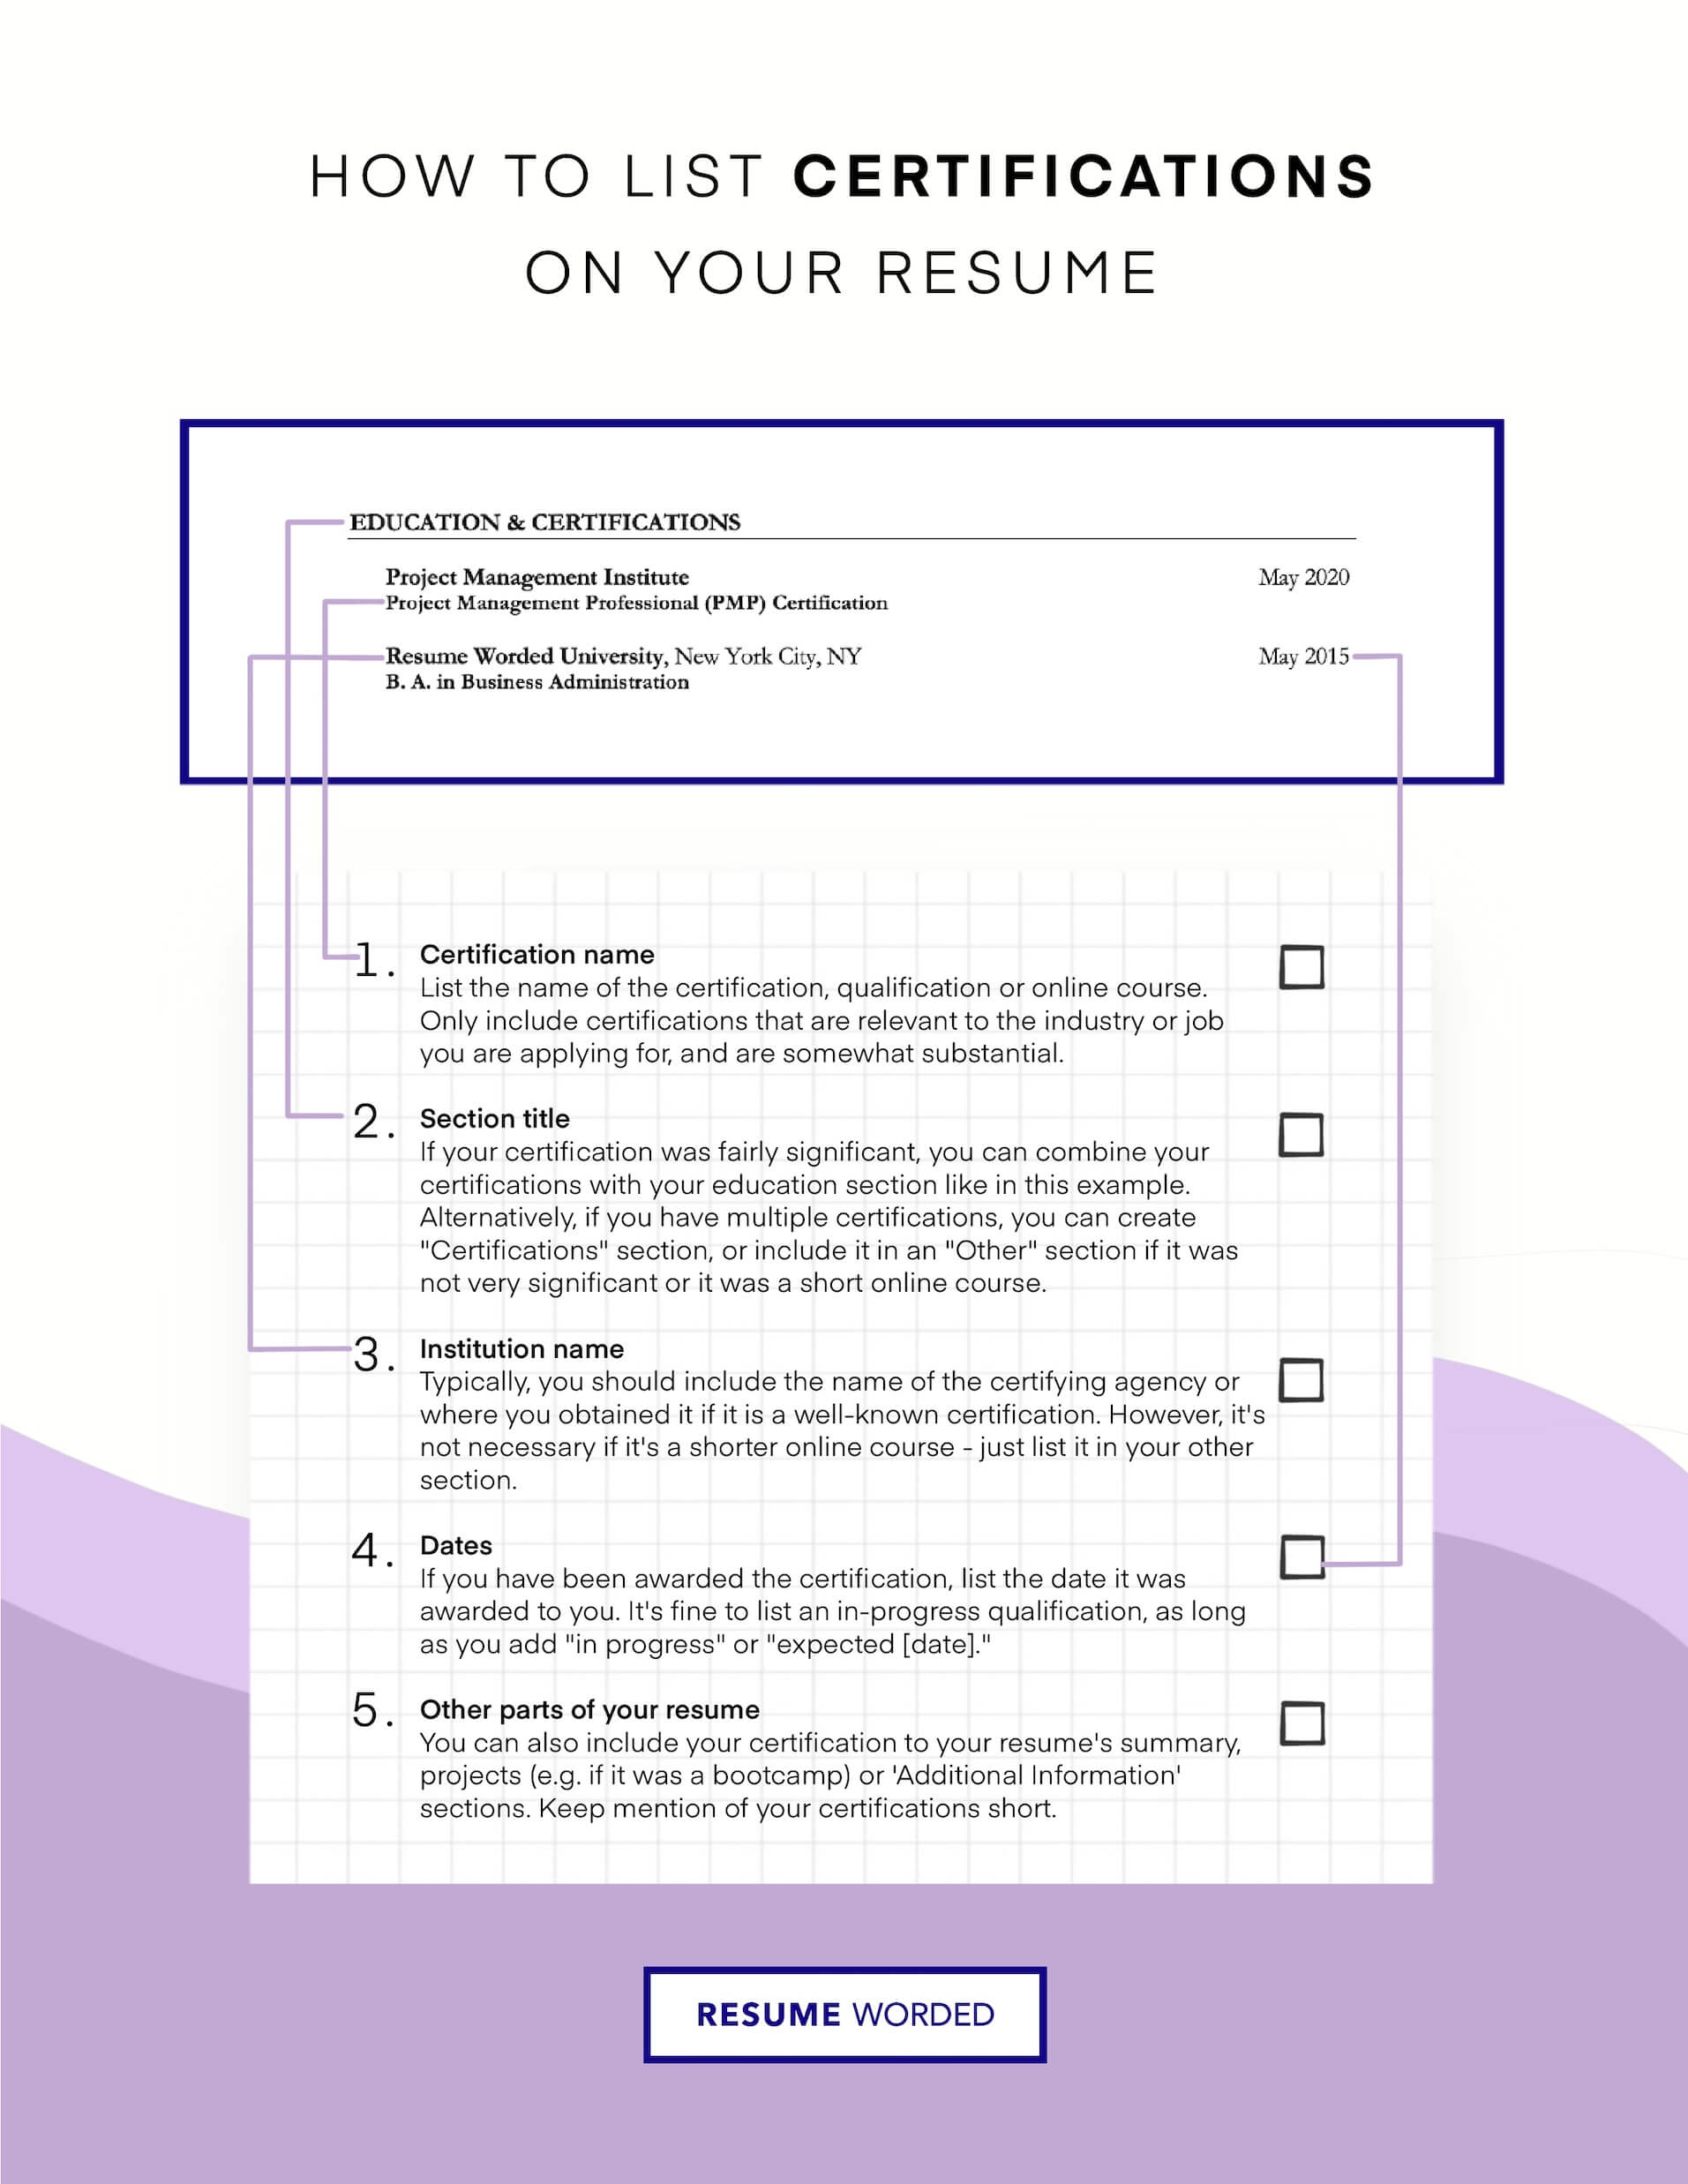 Consider additional certifications to land a role as a chemistry research student - Chemistry Research Student Resume